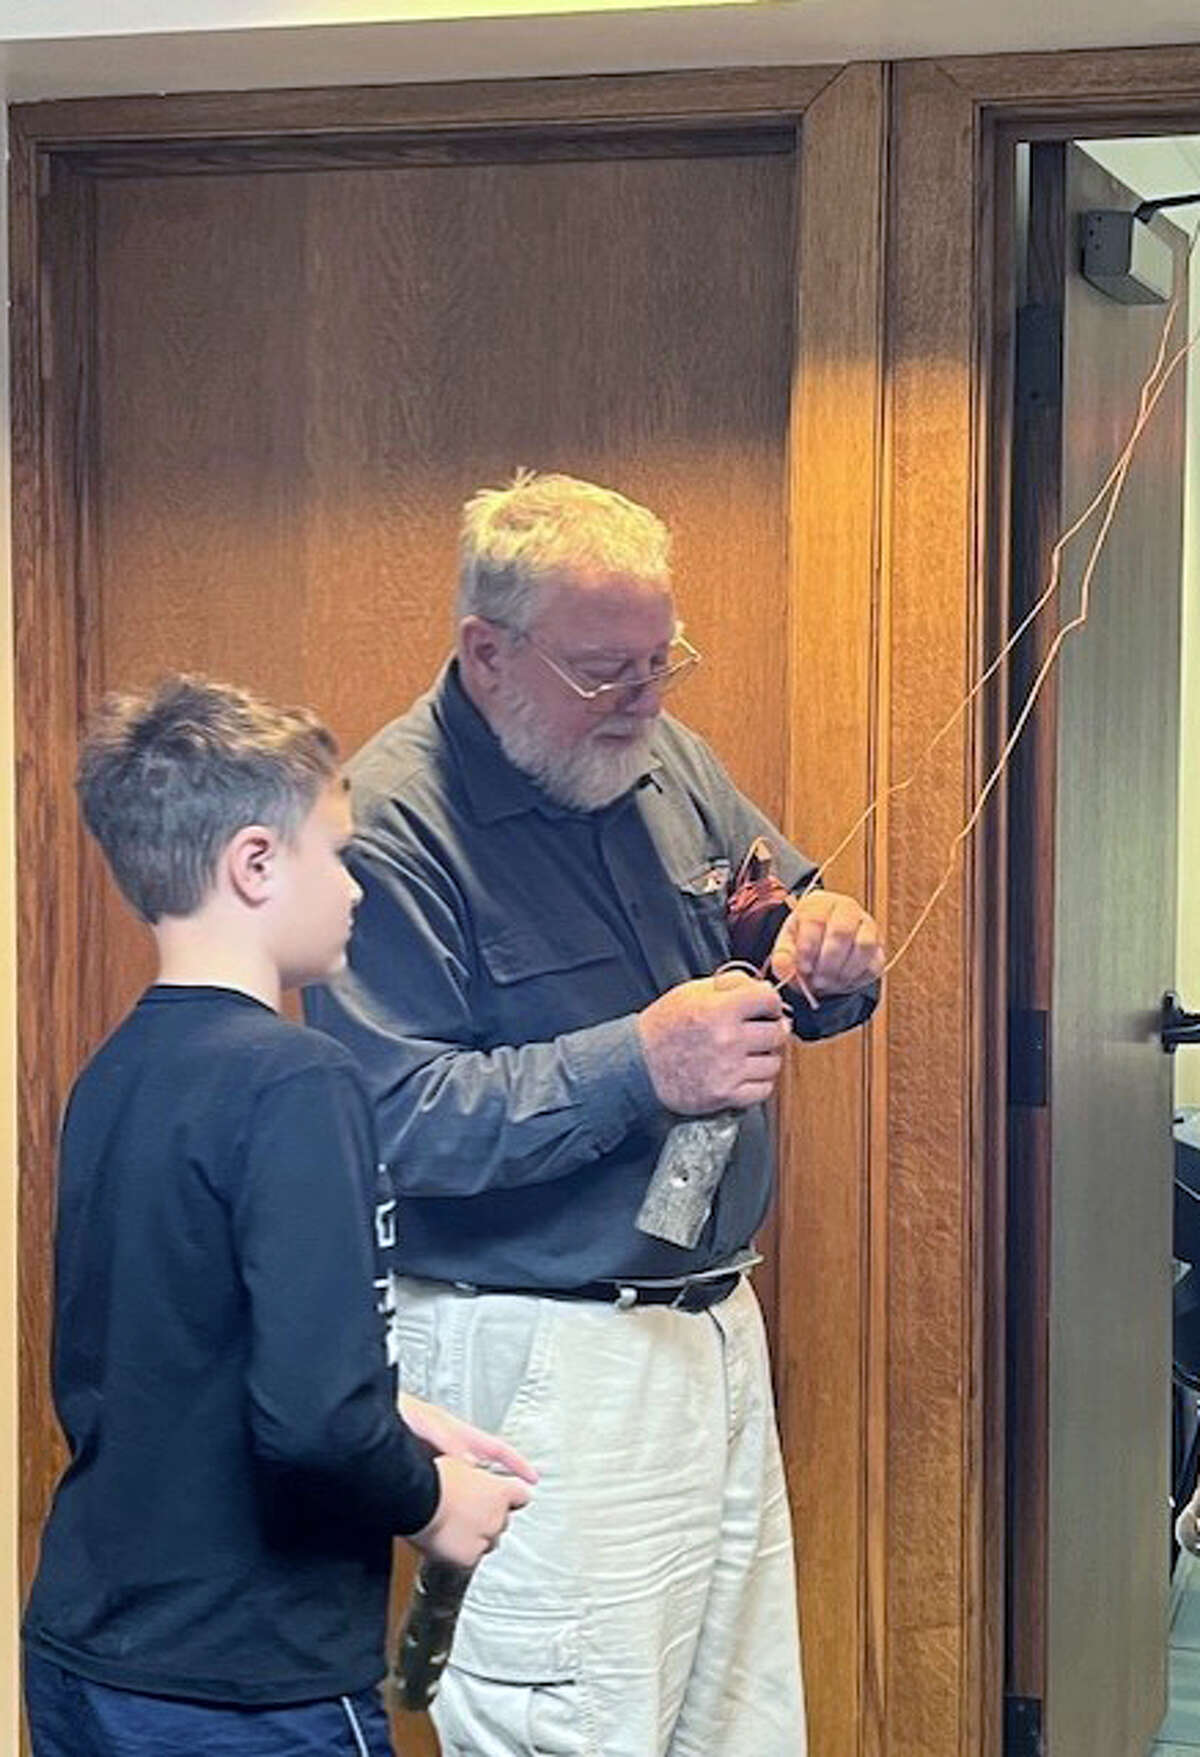 Participants in the first Young Explorers meeting of the new season learned how to identify birds and made their own bird feeders. Those attending Saturday's program were shown how to record birds coming to their feeders.